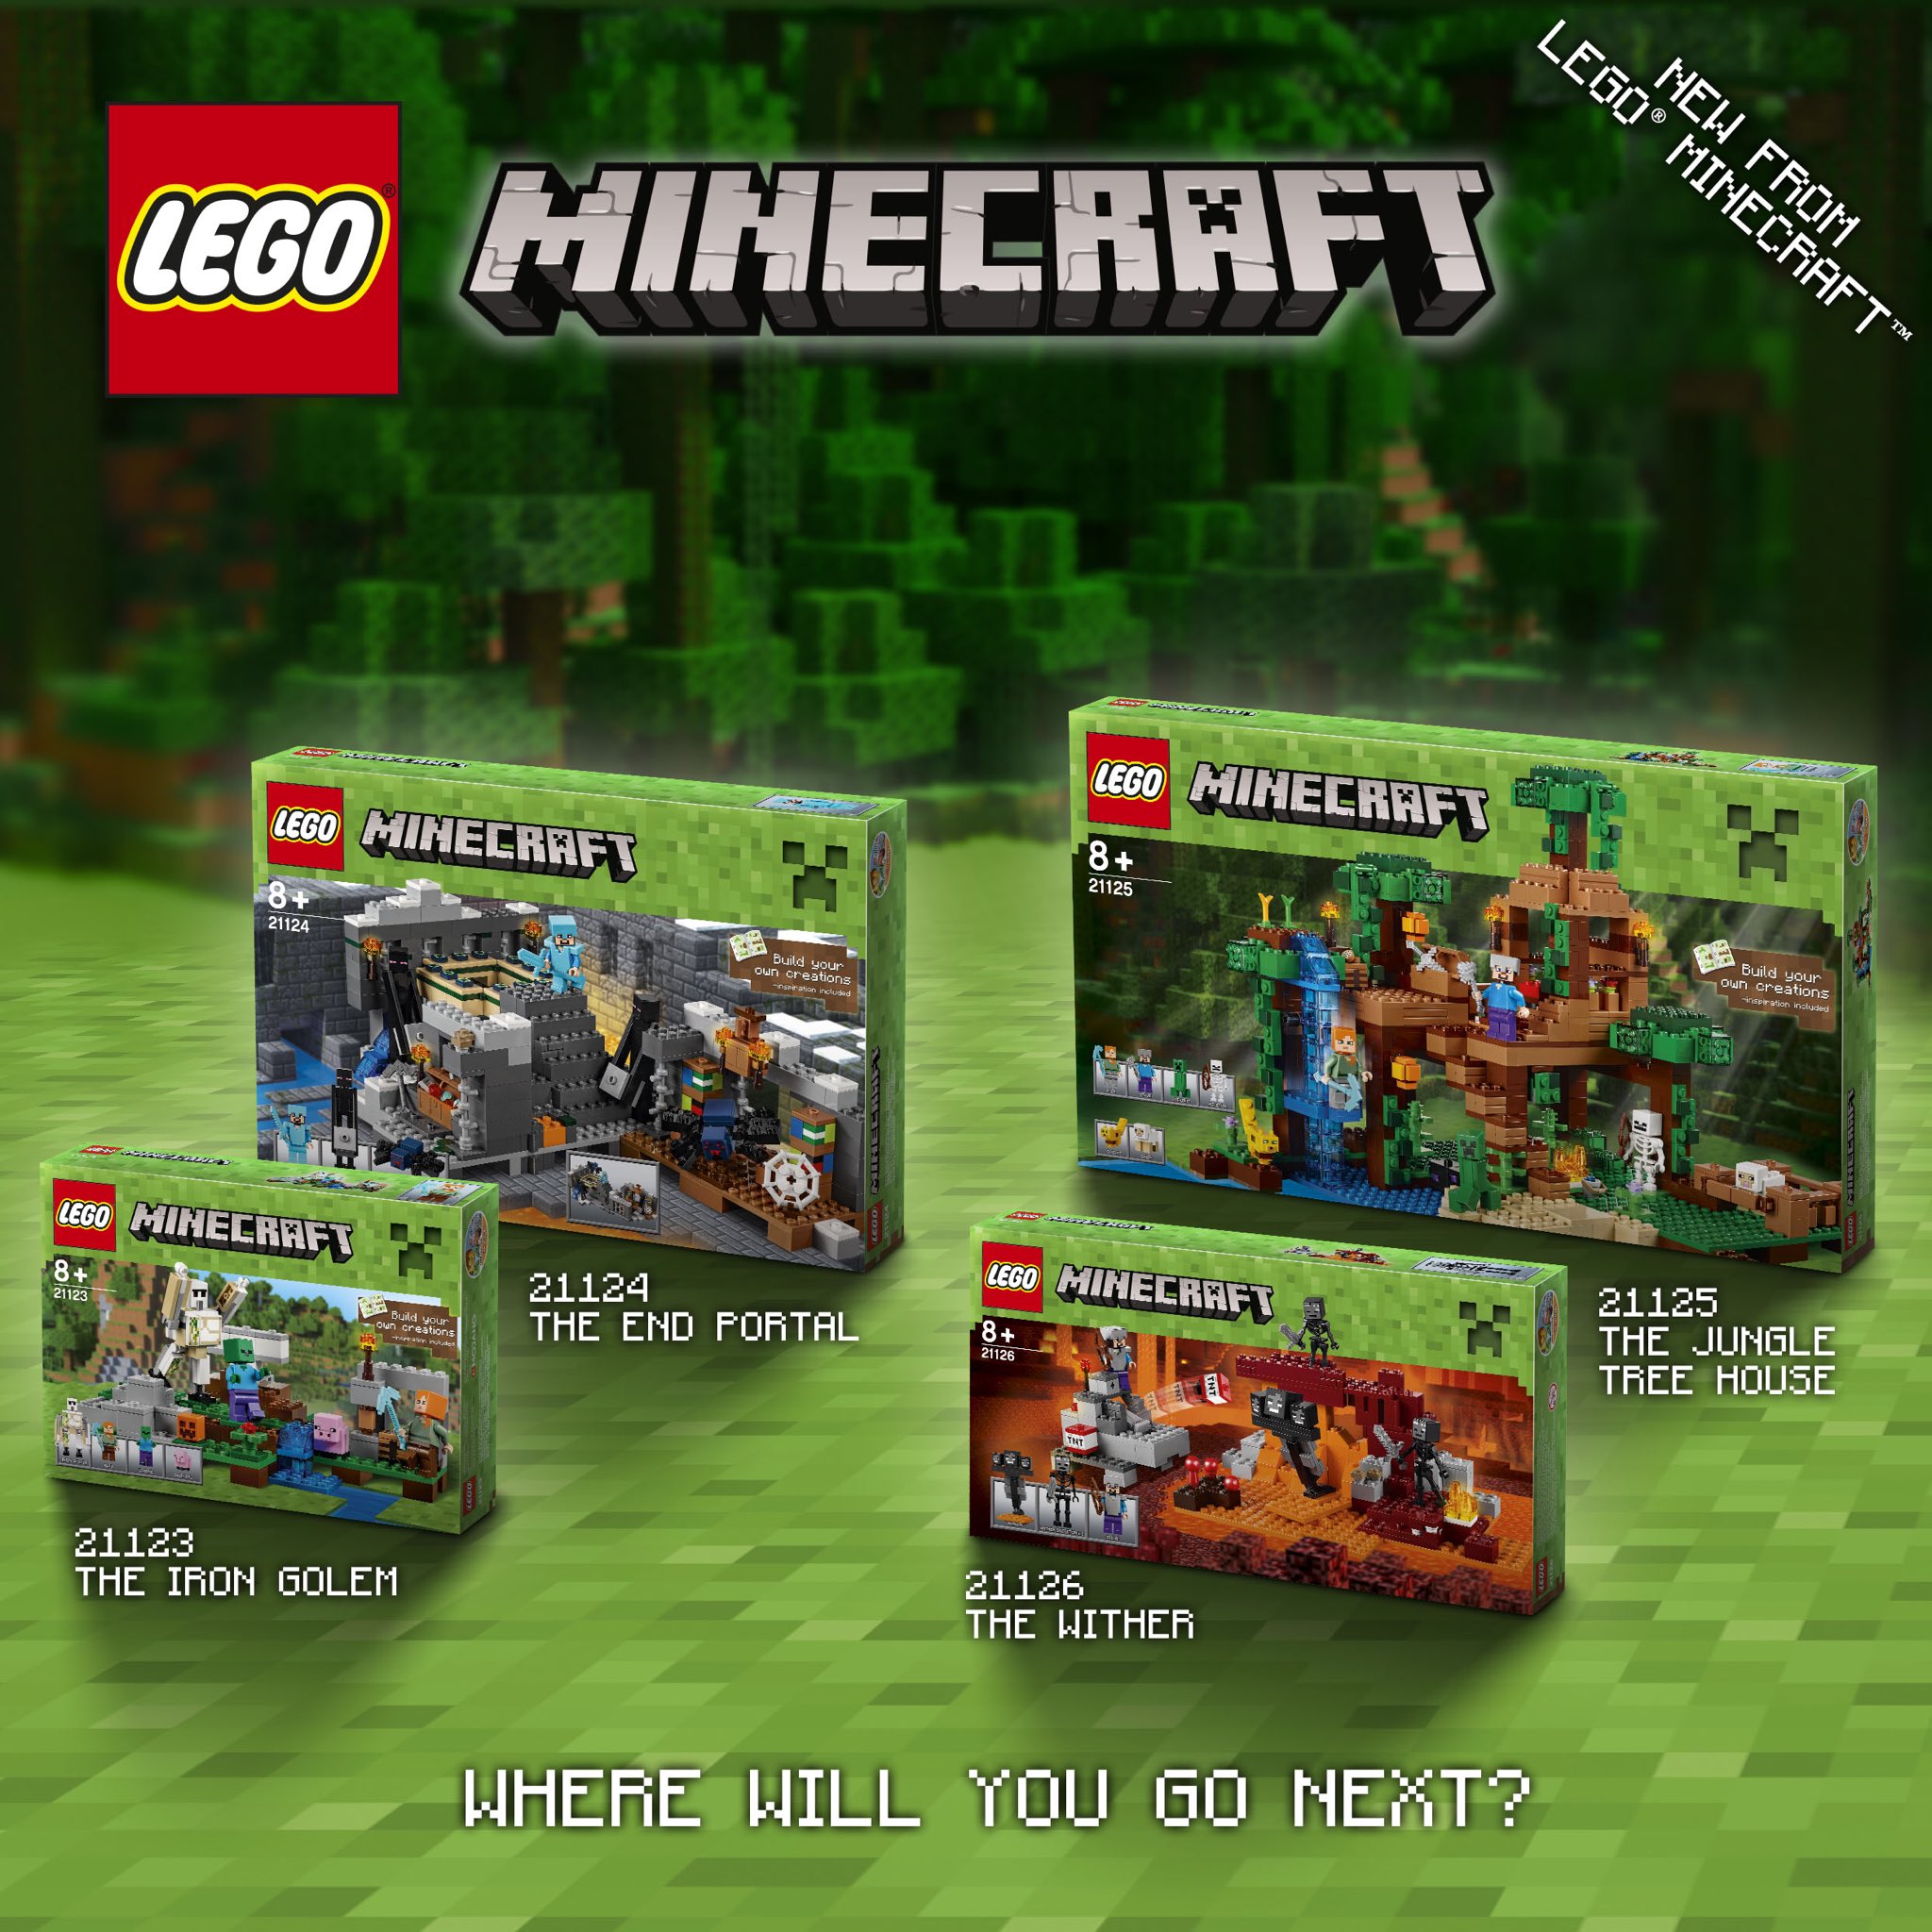 LEGO Twitter: "The NEW LEGO Minecraft products are now available! Check them out at https://t.co/Gcx6XguTol #LEGOMinecraft https://t.co/c5B03iWwyM" /